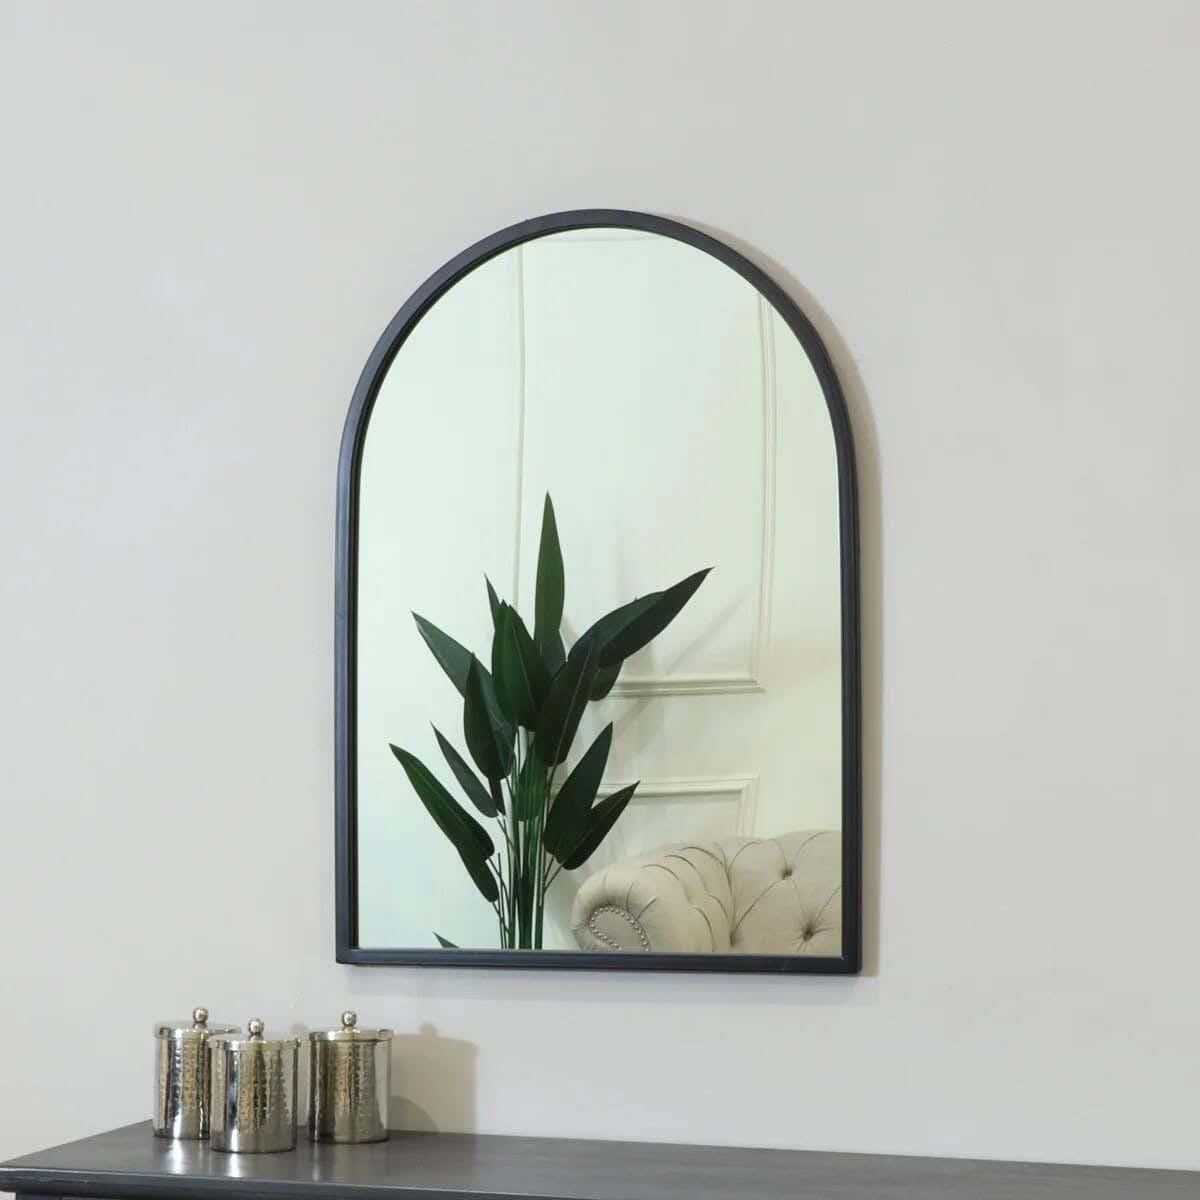 Get Oval Glass Wall Mirrors With Wooden Frame, 60 X 40 Cm - Clear MSTRN309CLR with best offers | Raneen.com